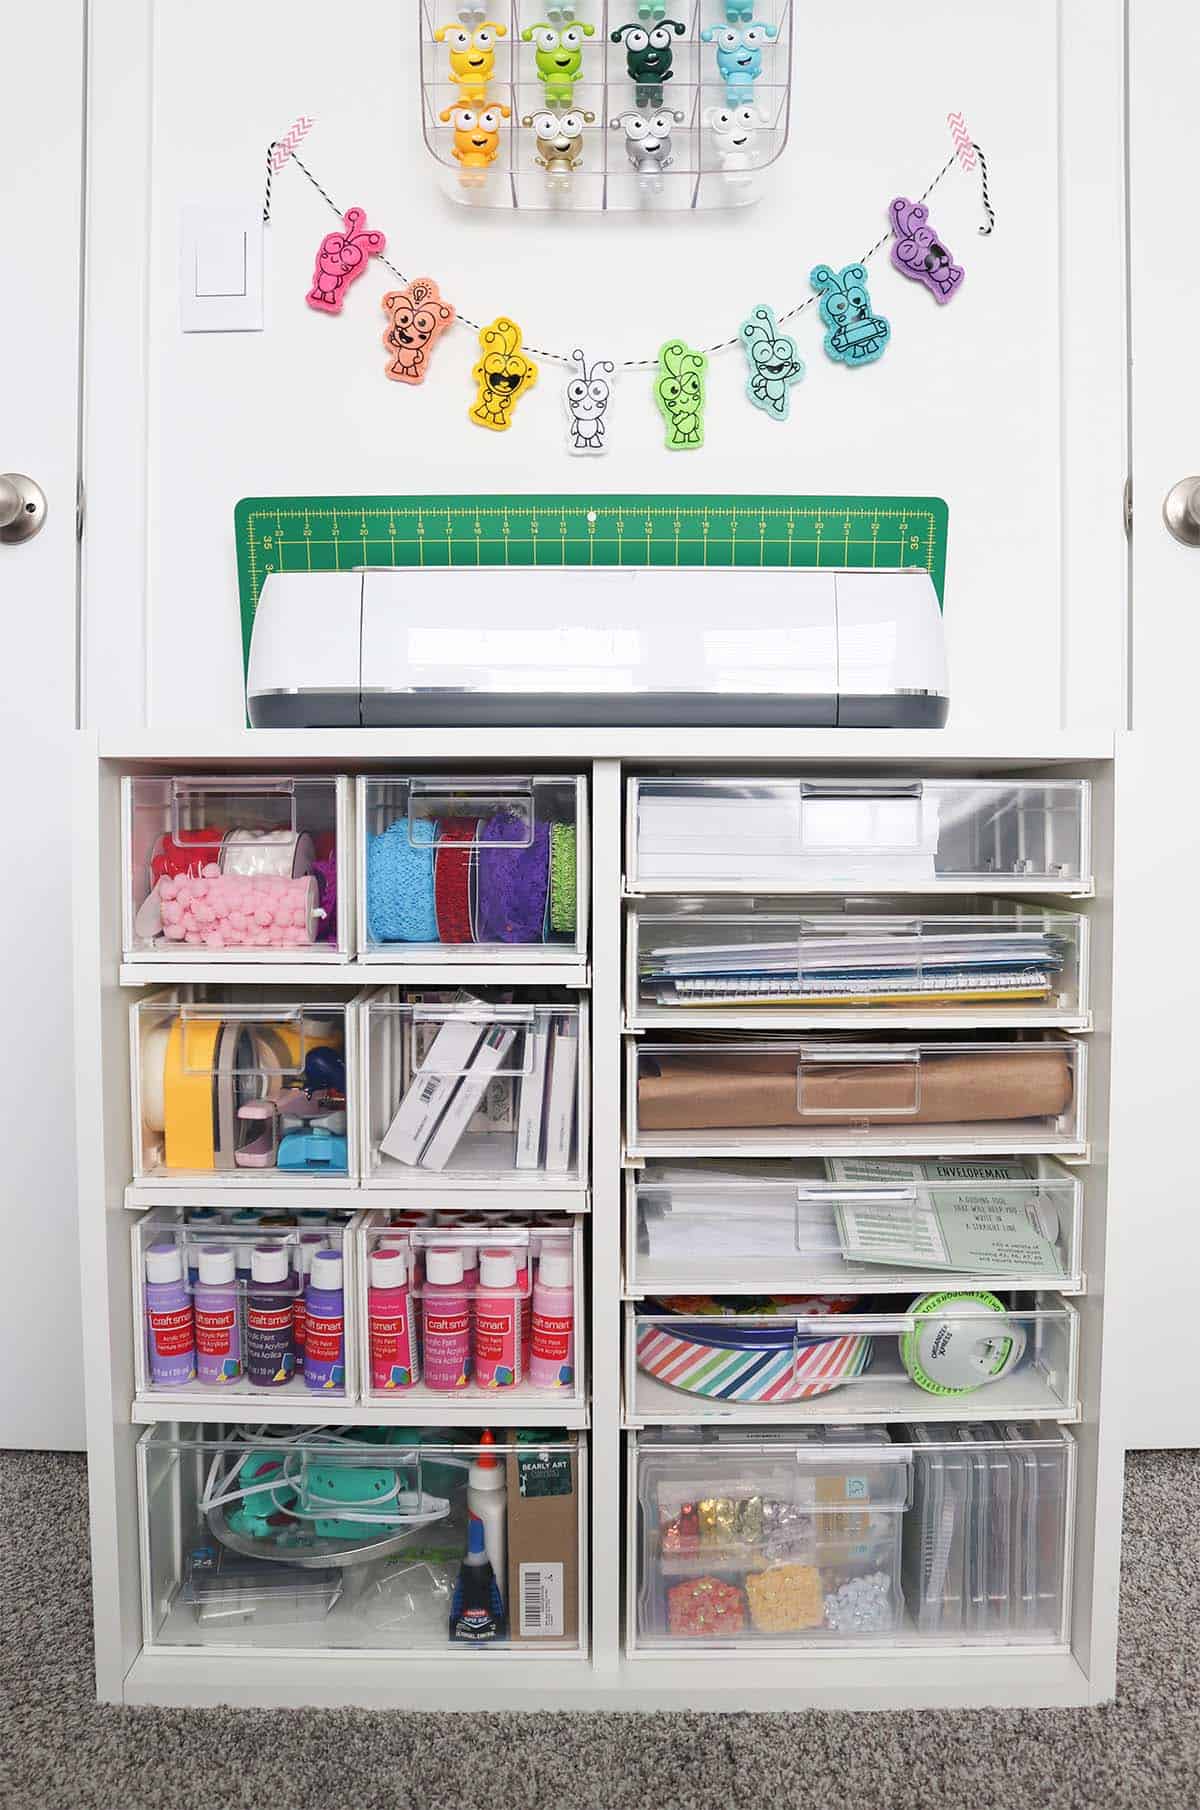 Create Room Cubby reveal and review and a peek at what's inside!